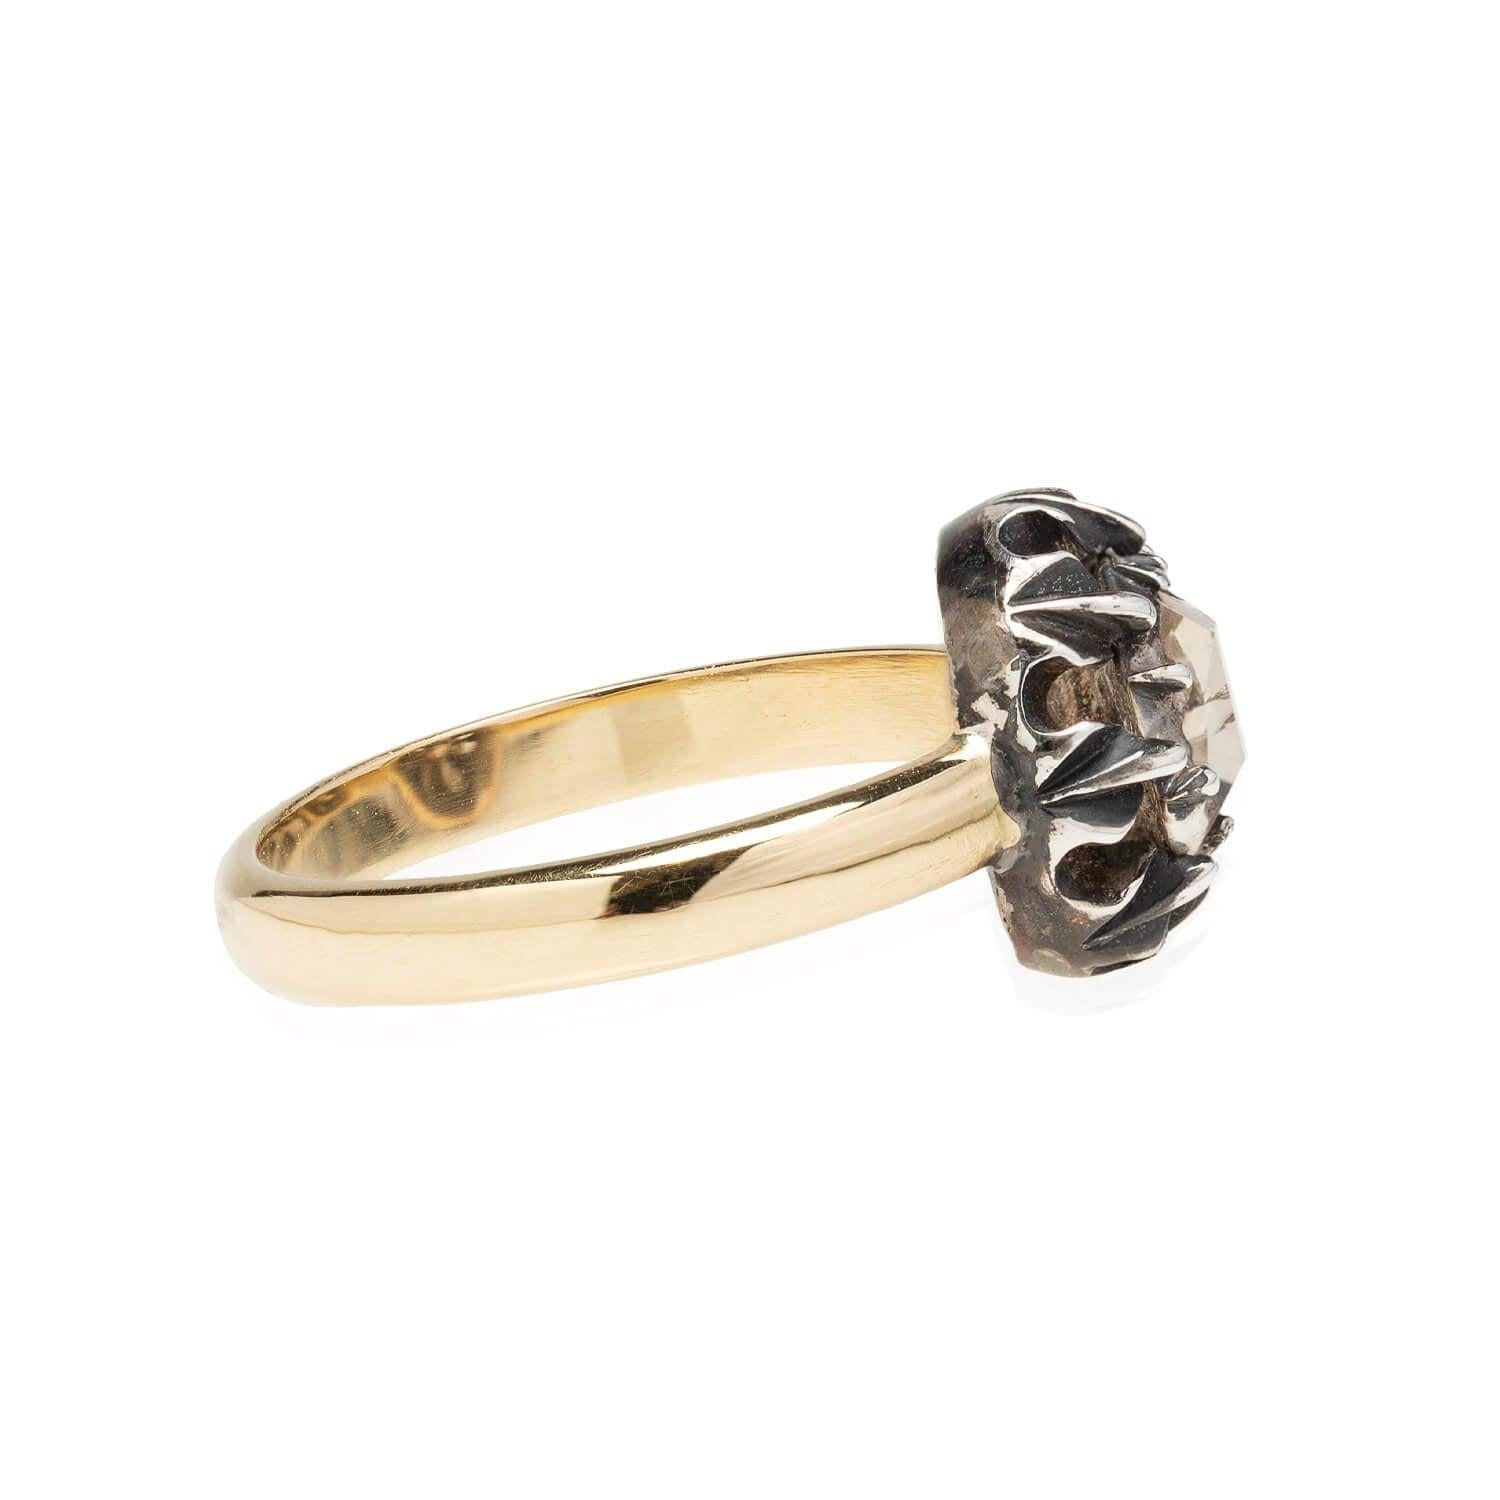 An interesting diamond conversion ring from the Victorian (ca1850s) era! Crafted in 18kt yellow gold and topped in beautifully patinaed sterling silver, this ring adorns a unique Table Cut diamond in a closed-back collet setting. The Table Cut